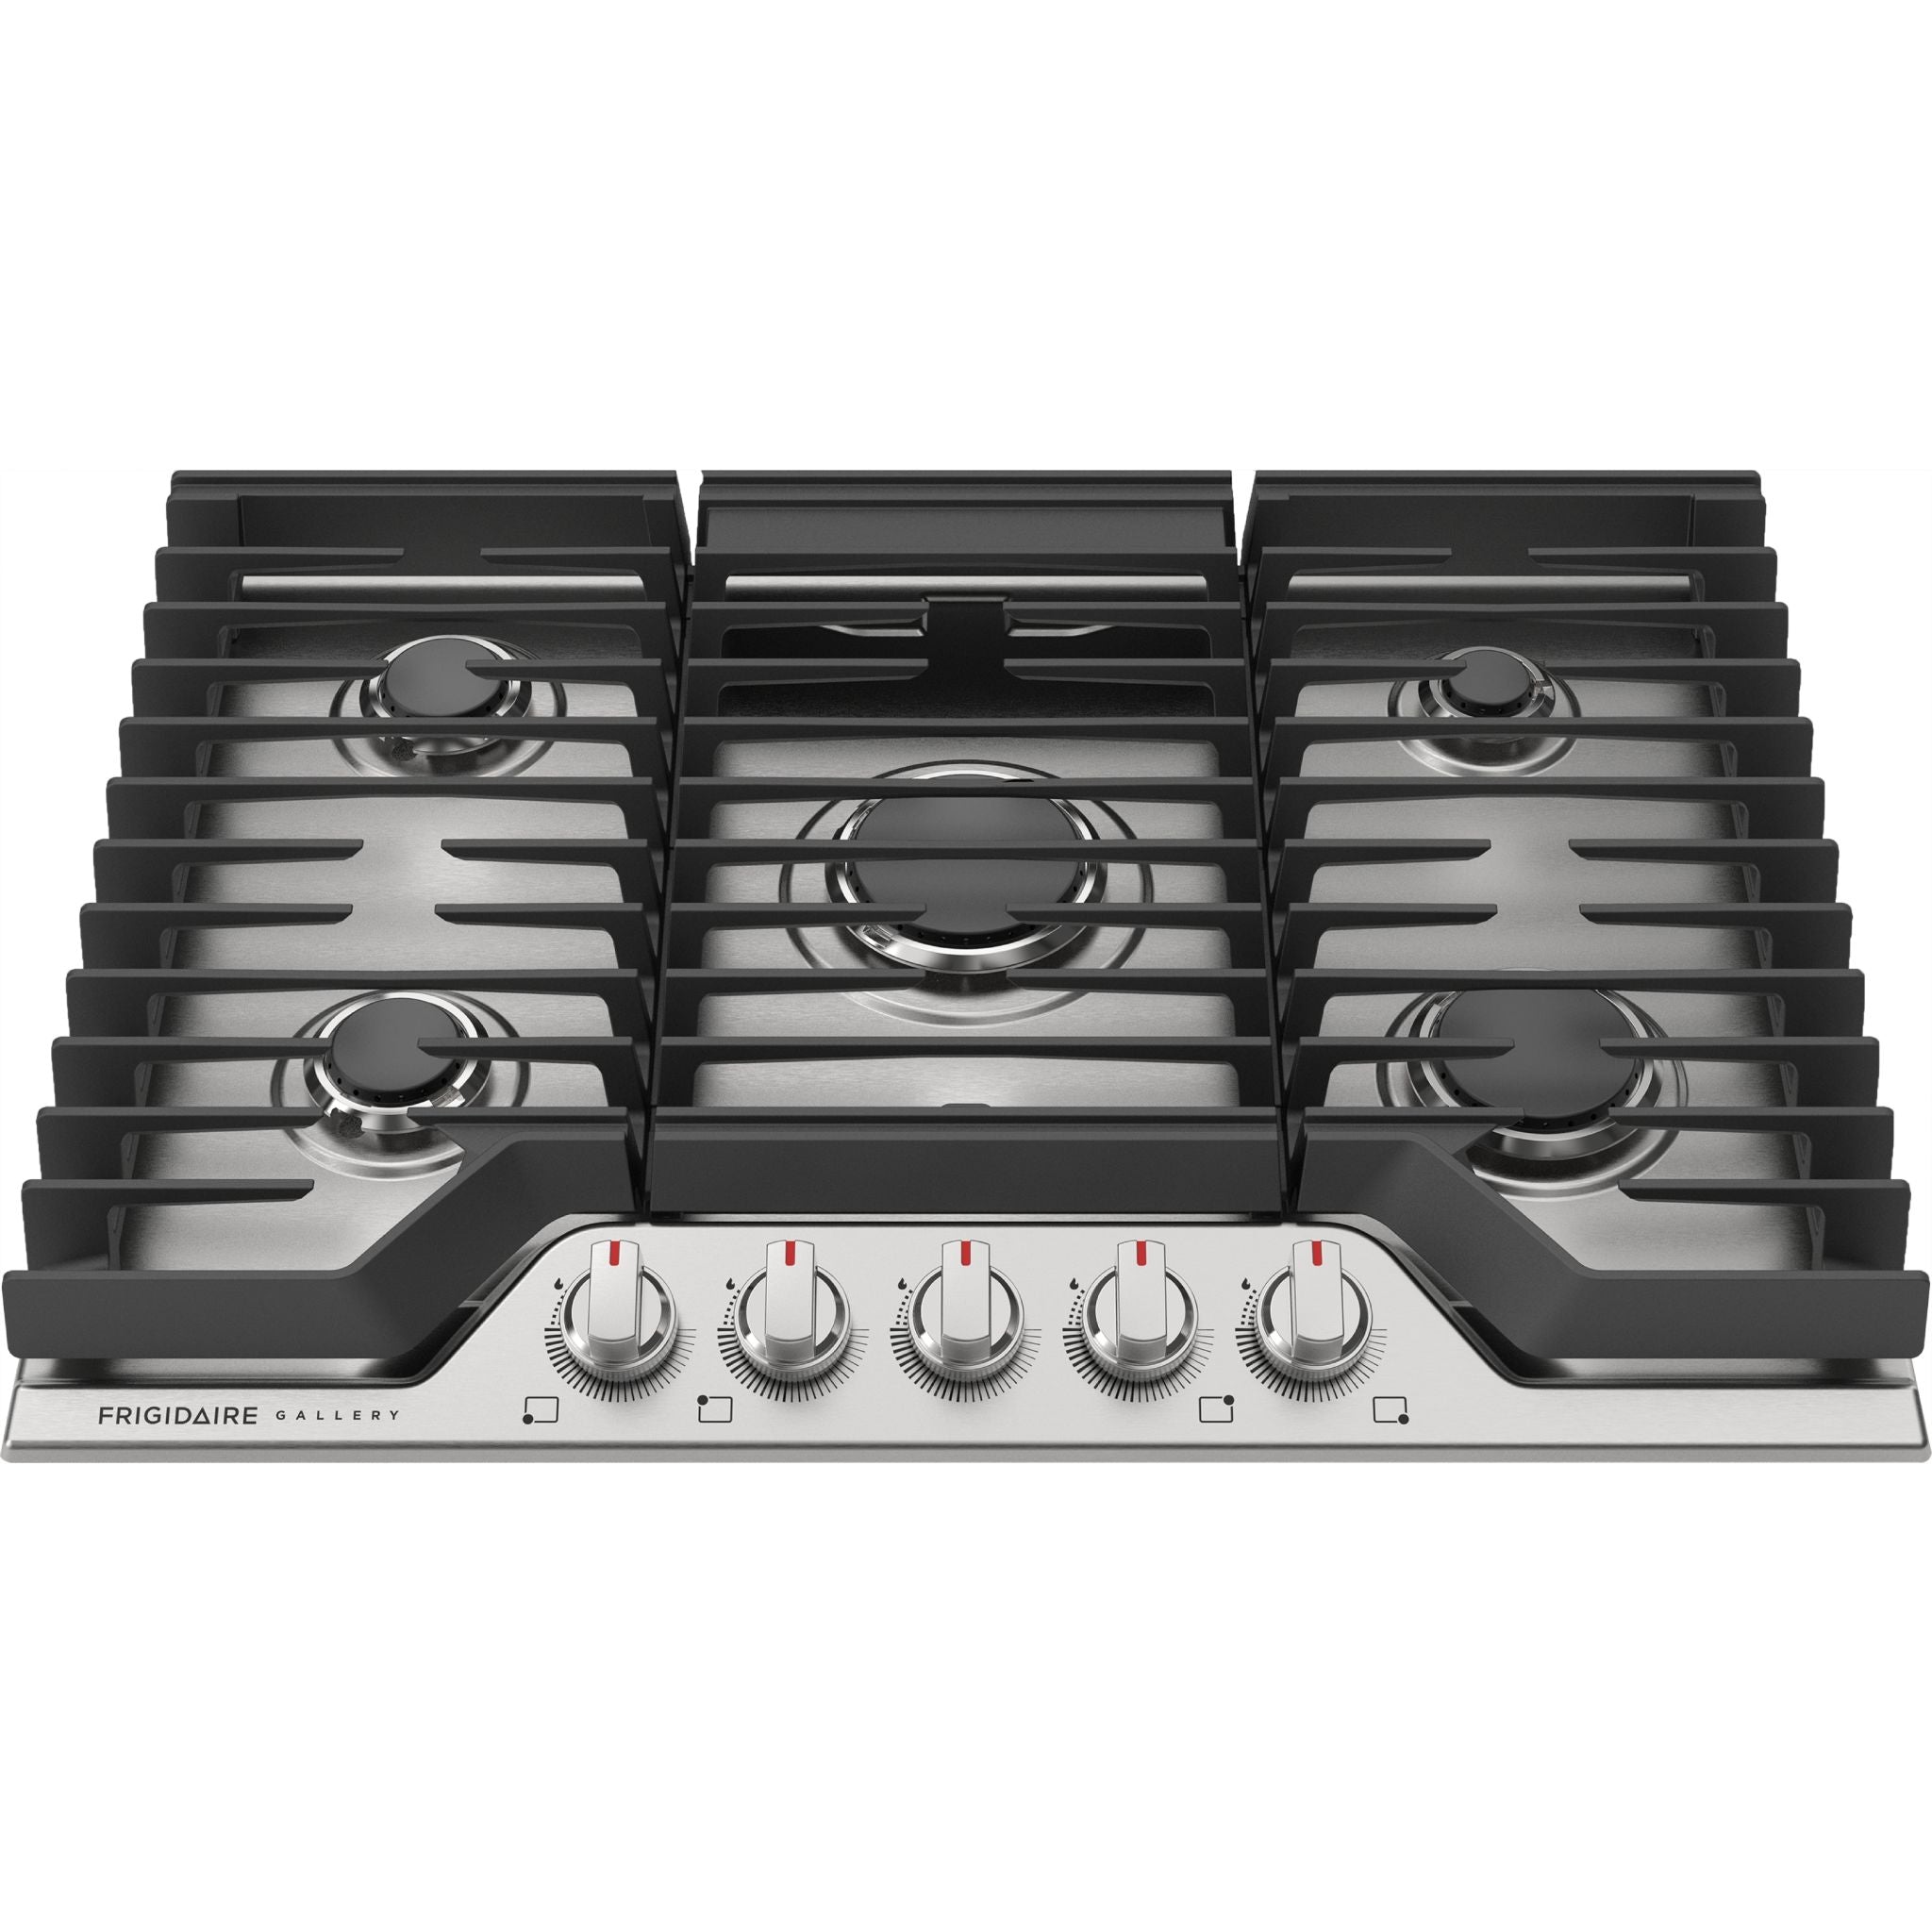 Frigidaire Gallery, Frigidaire Gallery 30" Gas Cooktop (GCCG3048AS) - Stainless Steel